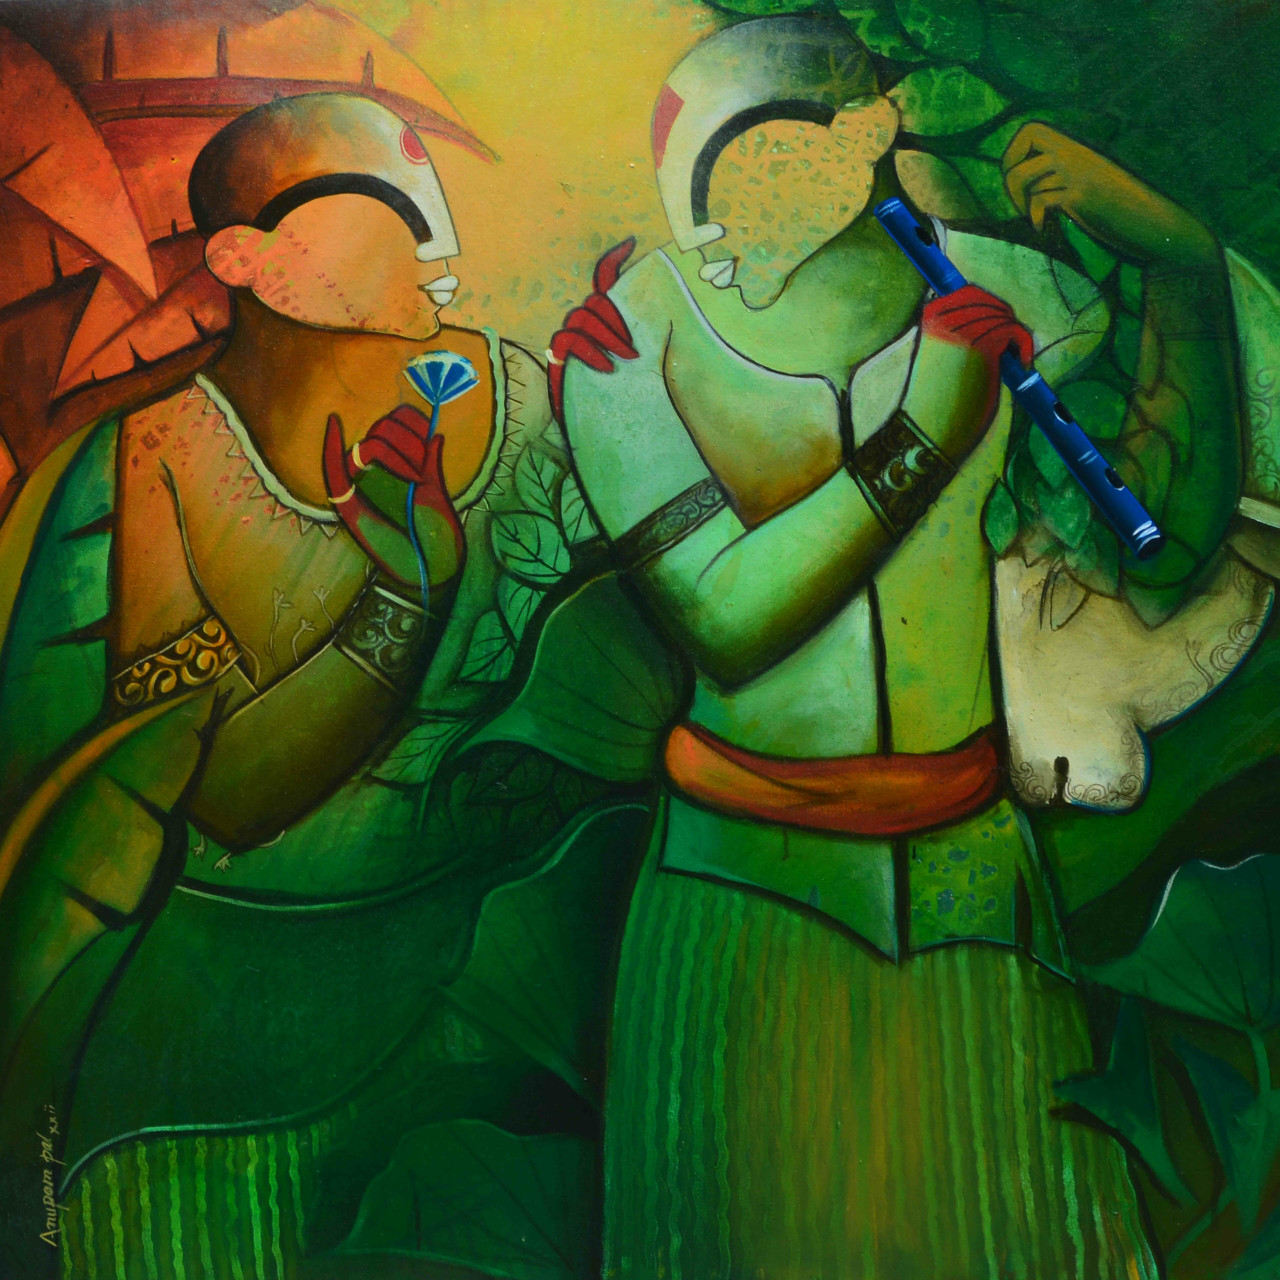 Buy Melodies of Life Handmade Painting by ARTIST ANUPAM PAL. Code ...